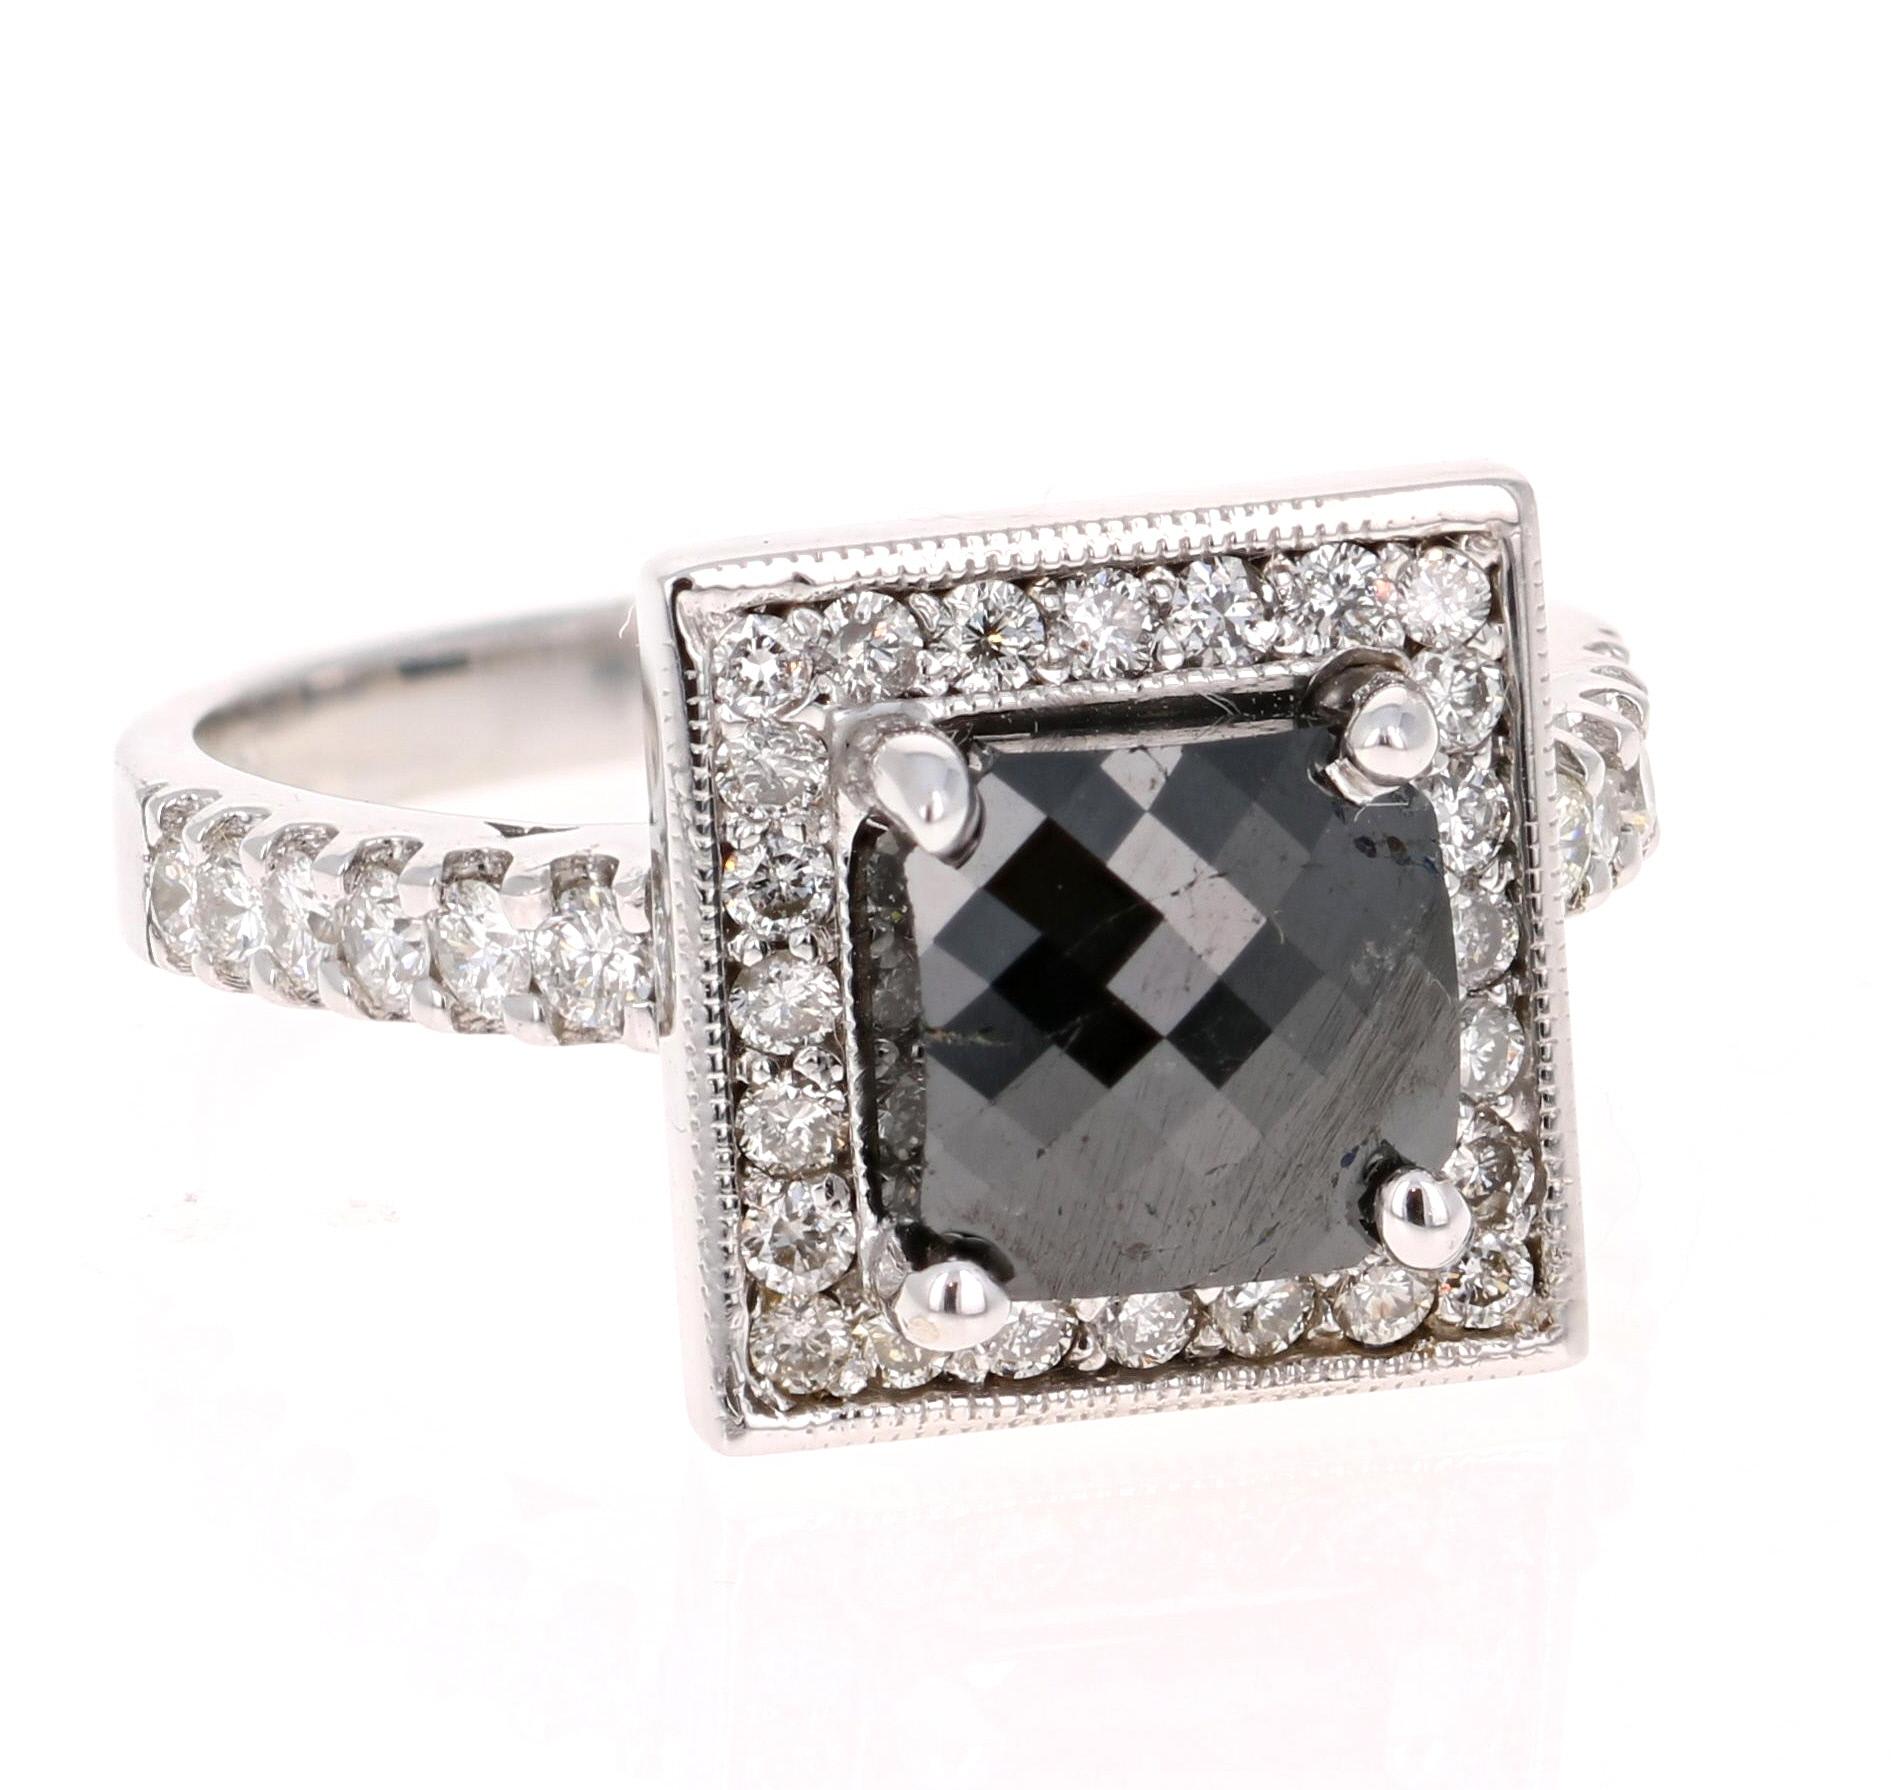 Gorgeous Black Diamond ring that can transform into an Engagement or Bridal Ring!  

There is a 1.89 carat Cushion Cut Black Diamond in the center which is surrounded by 37 Round Cut Diamonds that weigh 0.64 carats (Clarity: SI2, Color: F).  The